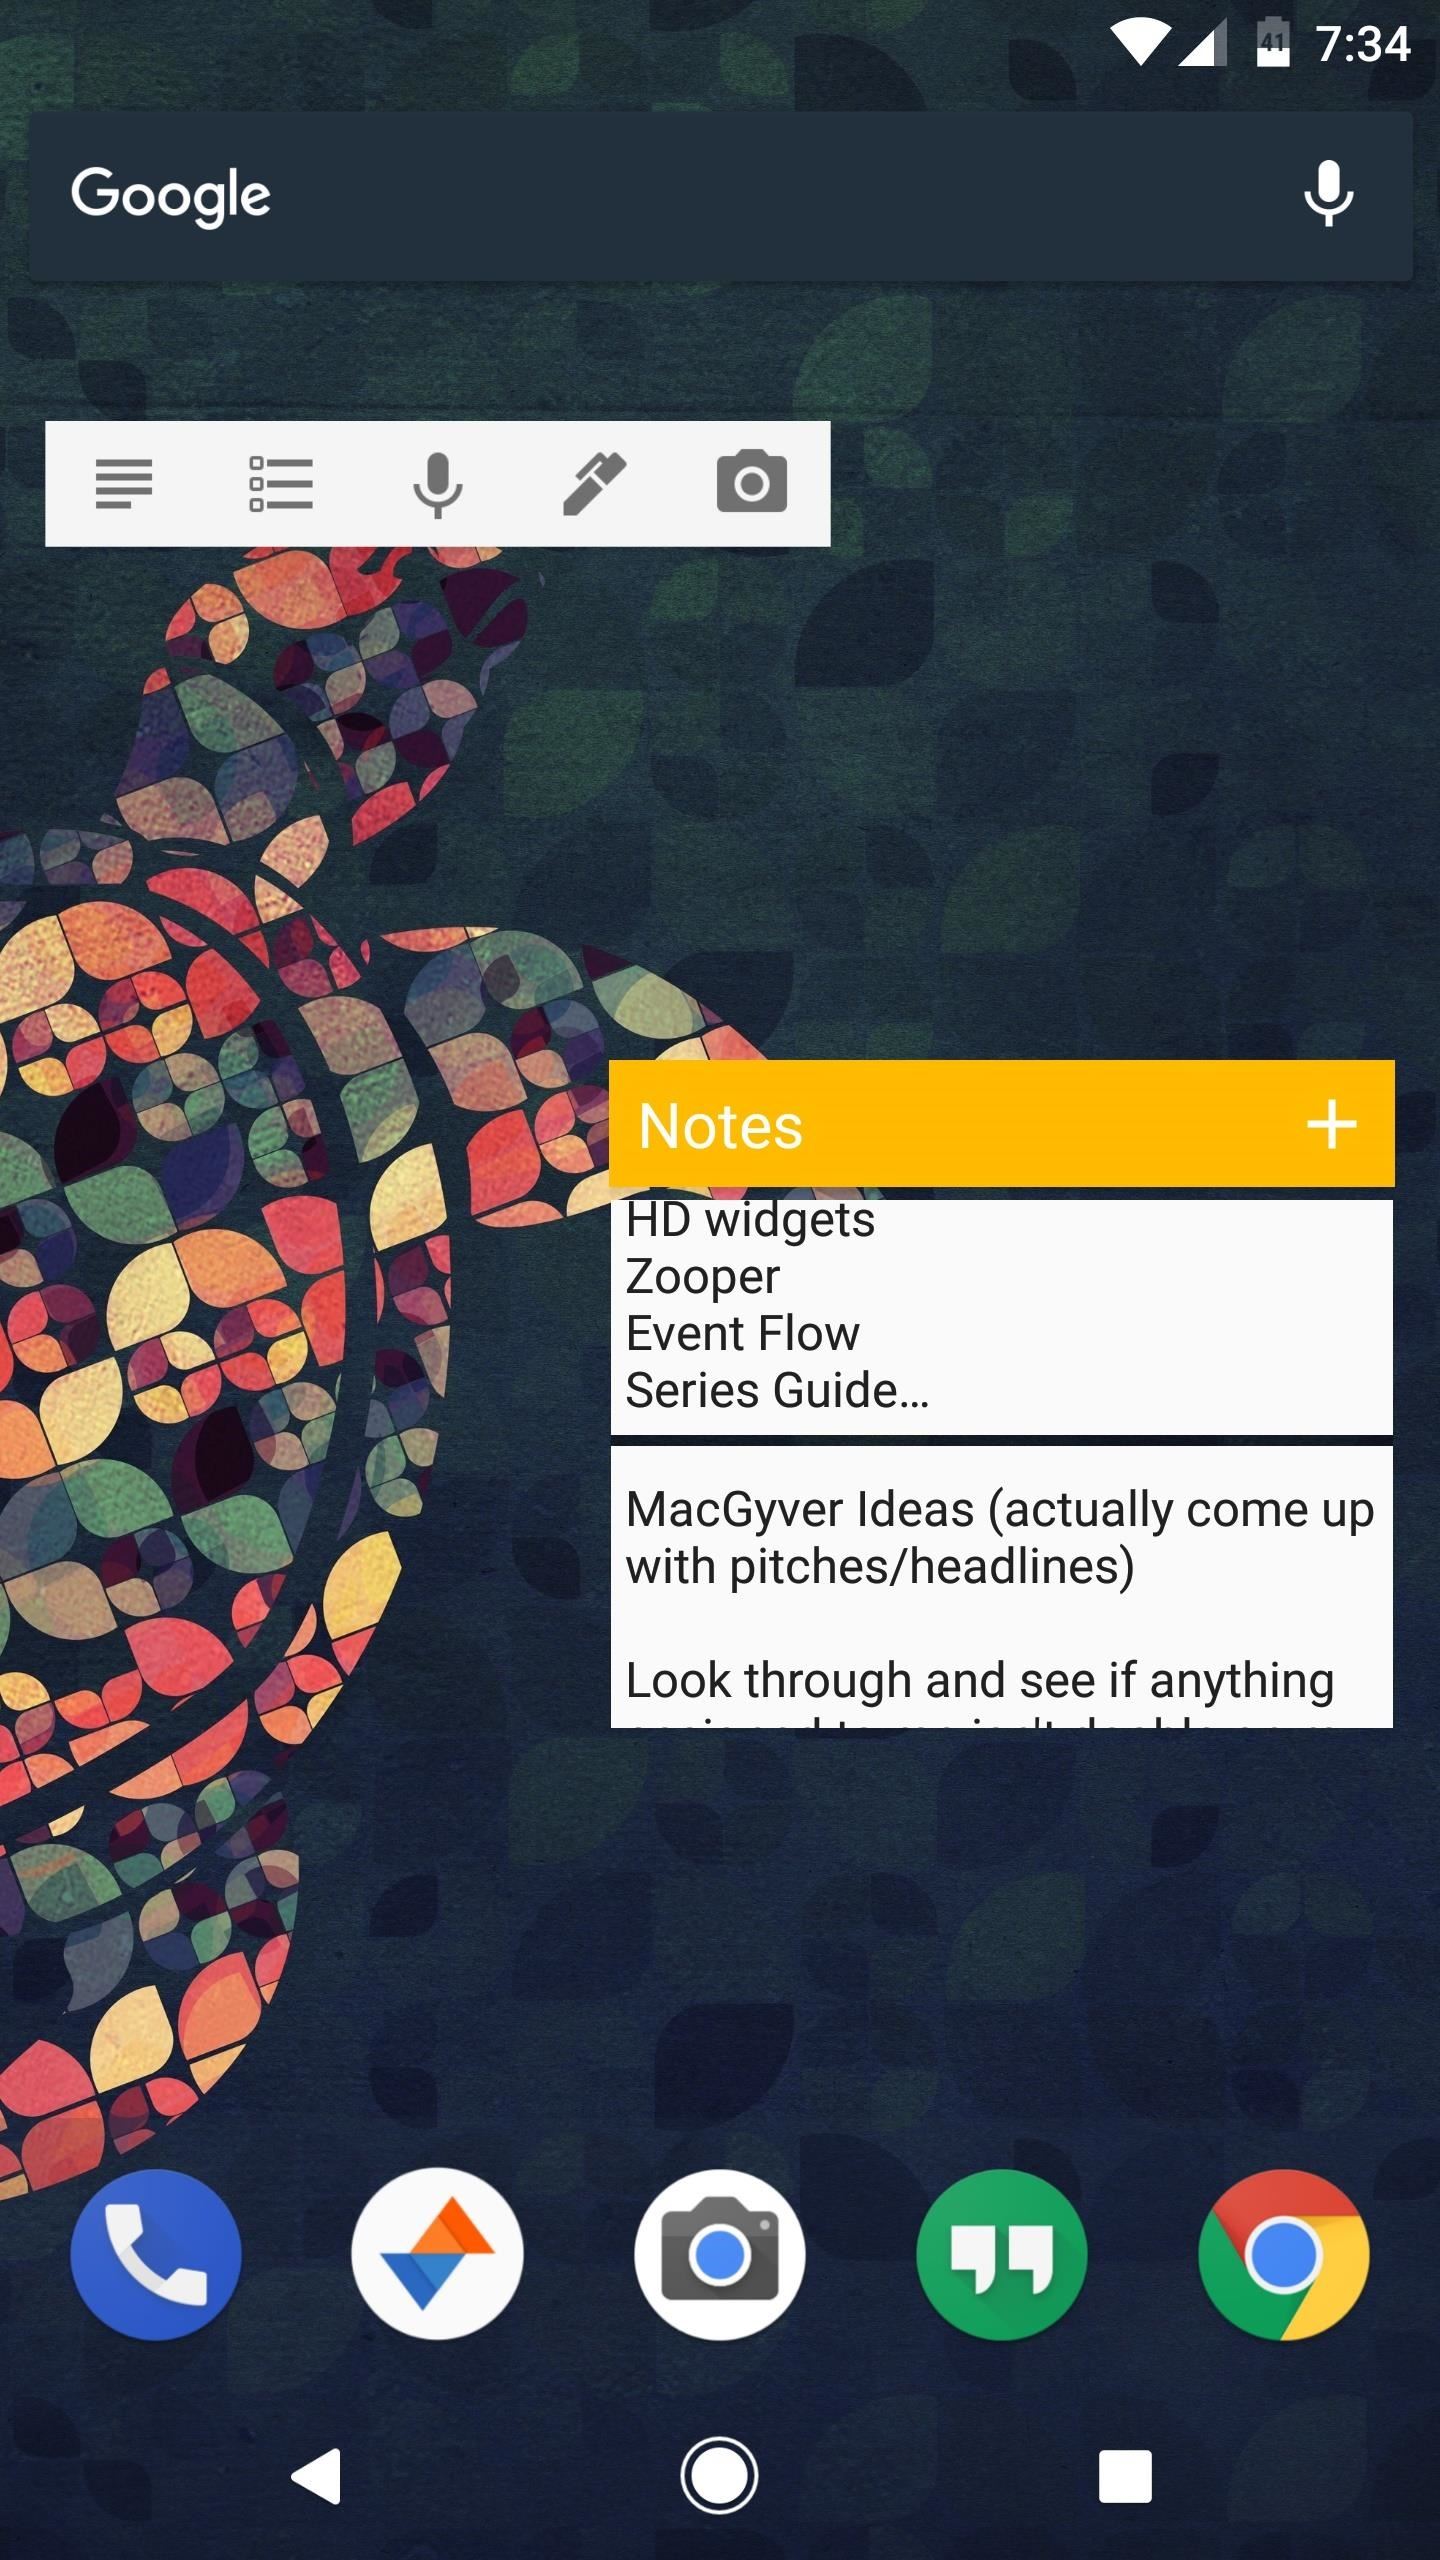 The 12 Best Android Widgets for Getting Things Done